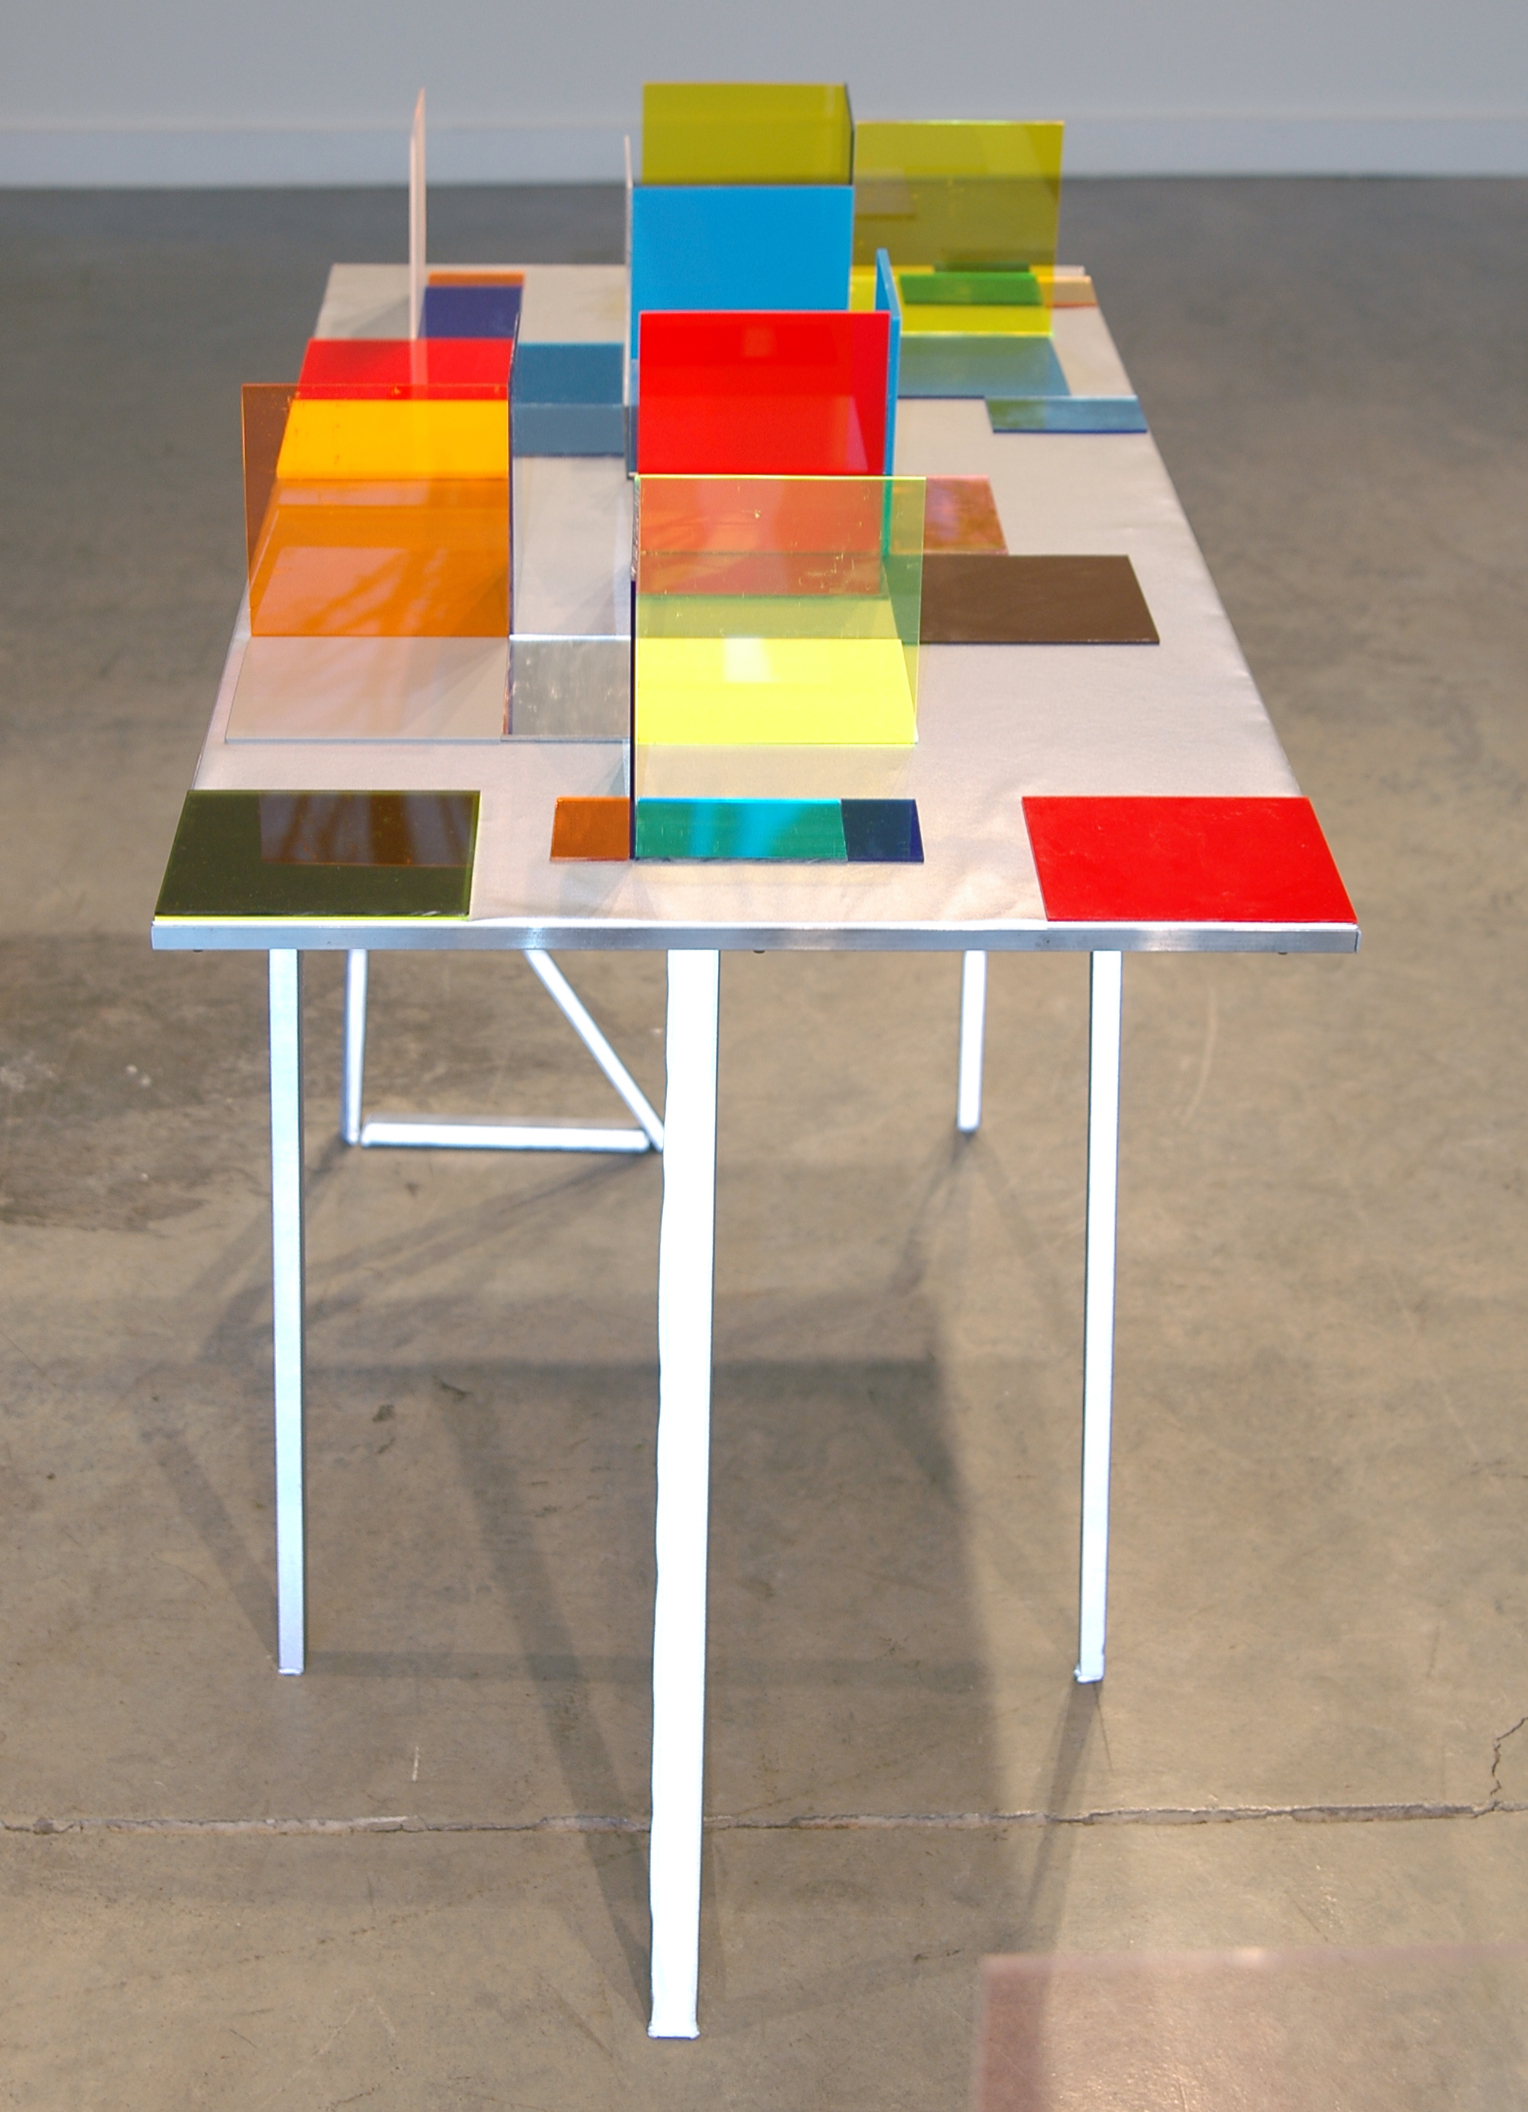   LUCY PULLEN   Hue III , fabric, aluminum, plexi and tape, 23"w x 47"t x 28"h, 2012   